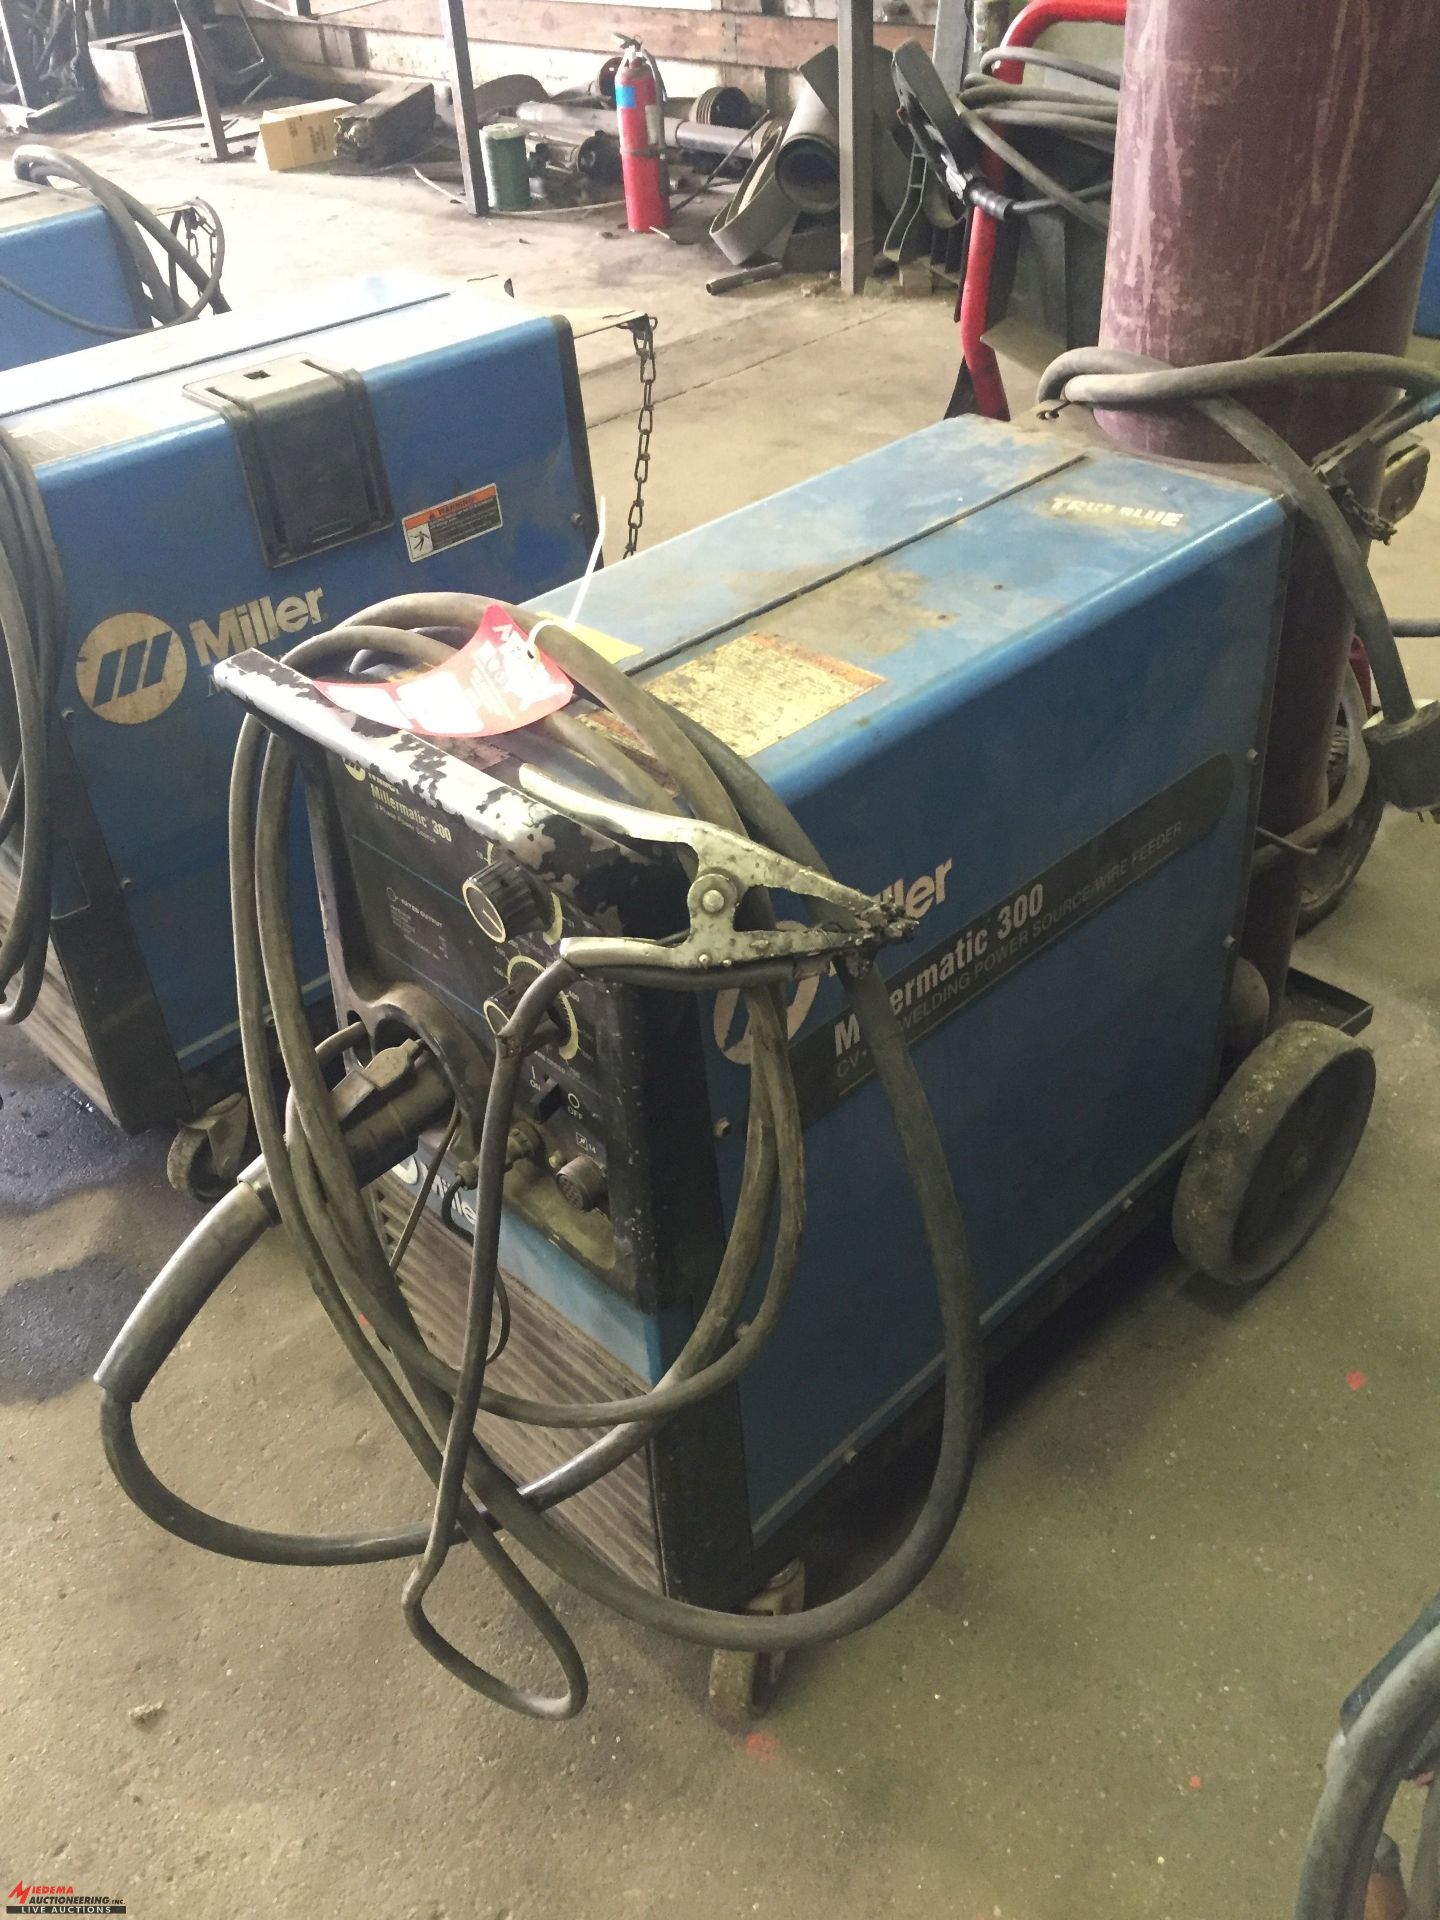 MILLER MILLERMATIC 300 WIRE FEED WELDER, 3 PHASE [TANK IS NOT INCLUDED] [LOCATION: EAST WINANS